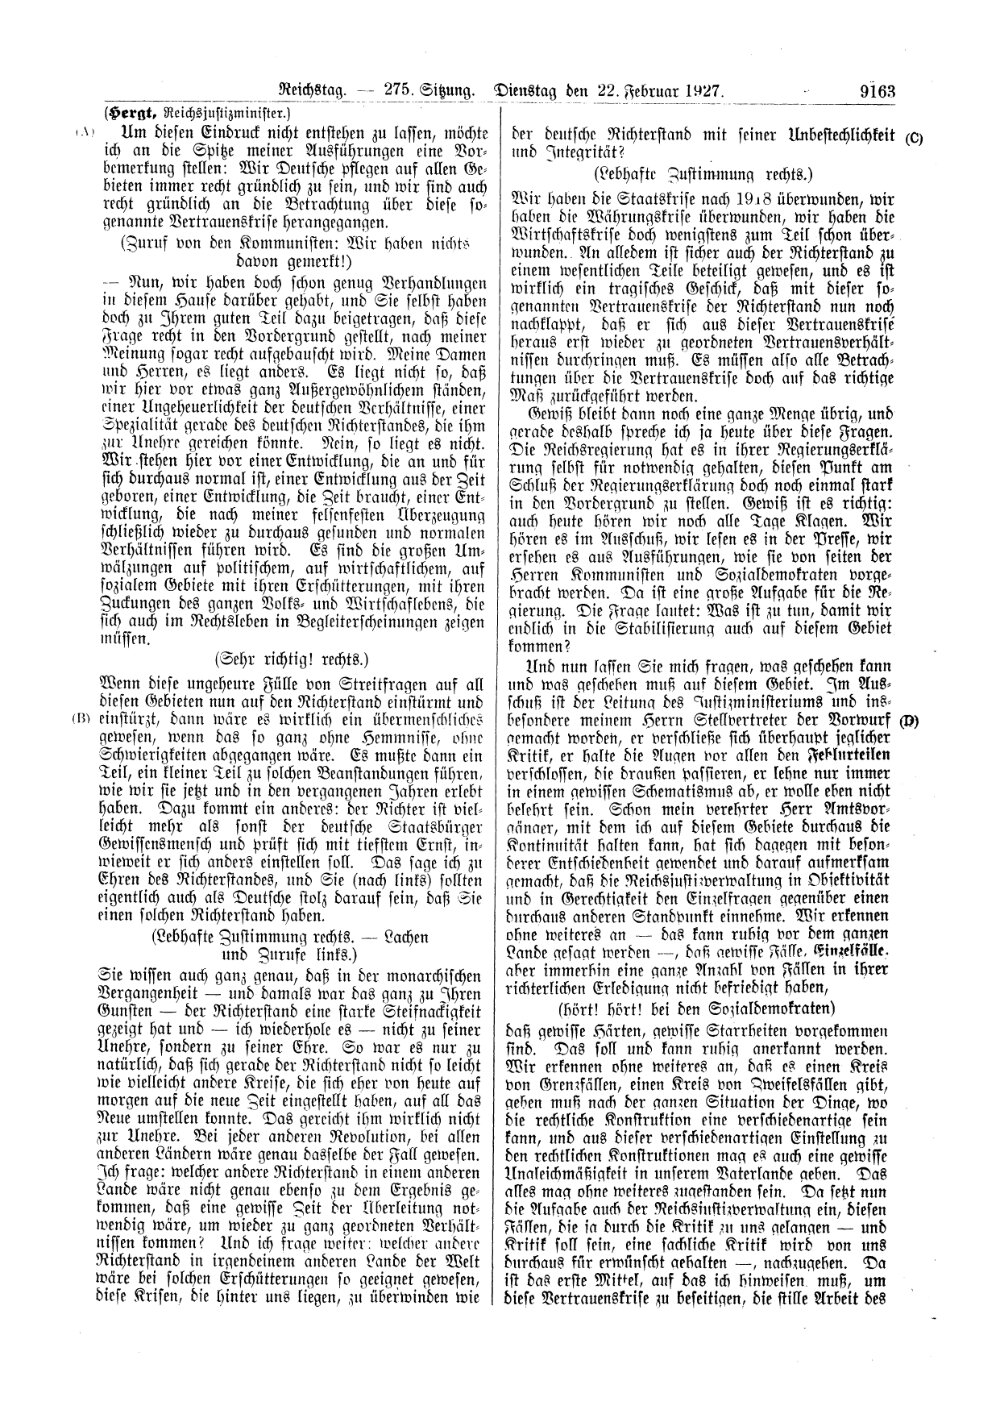 Scan of page 9163